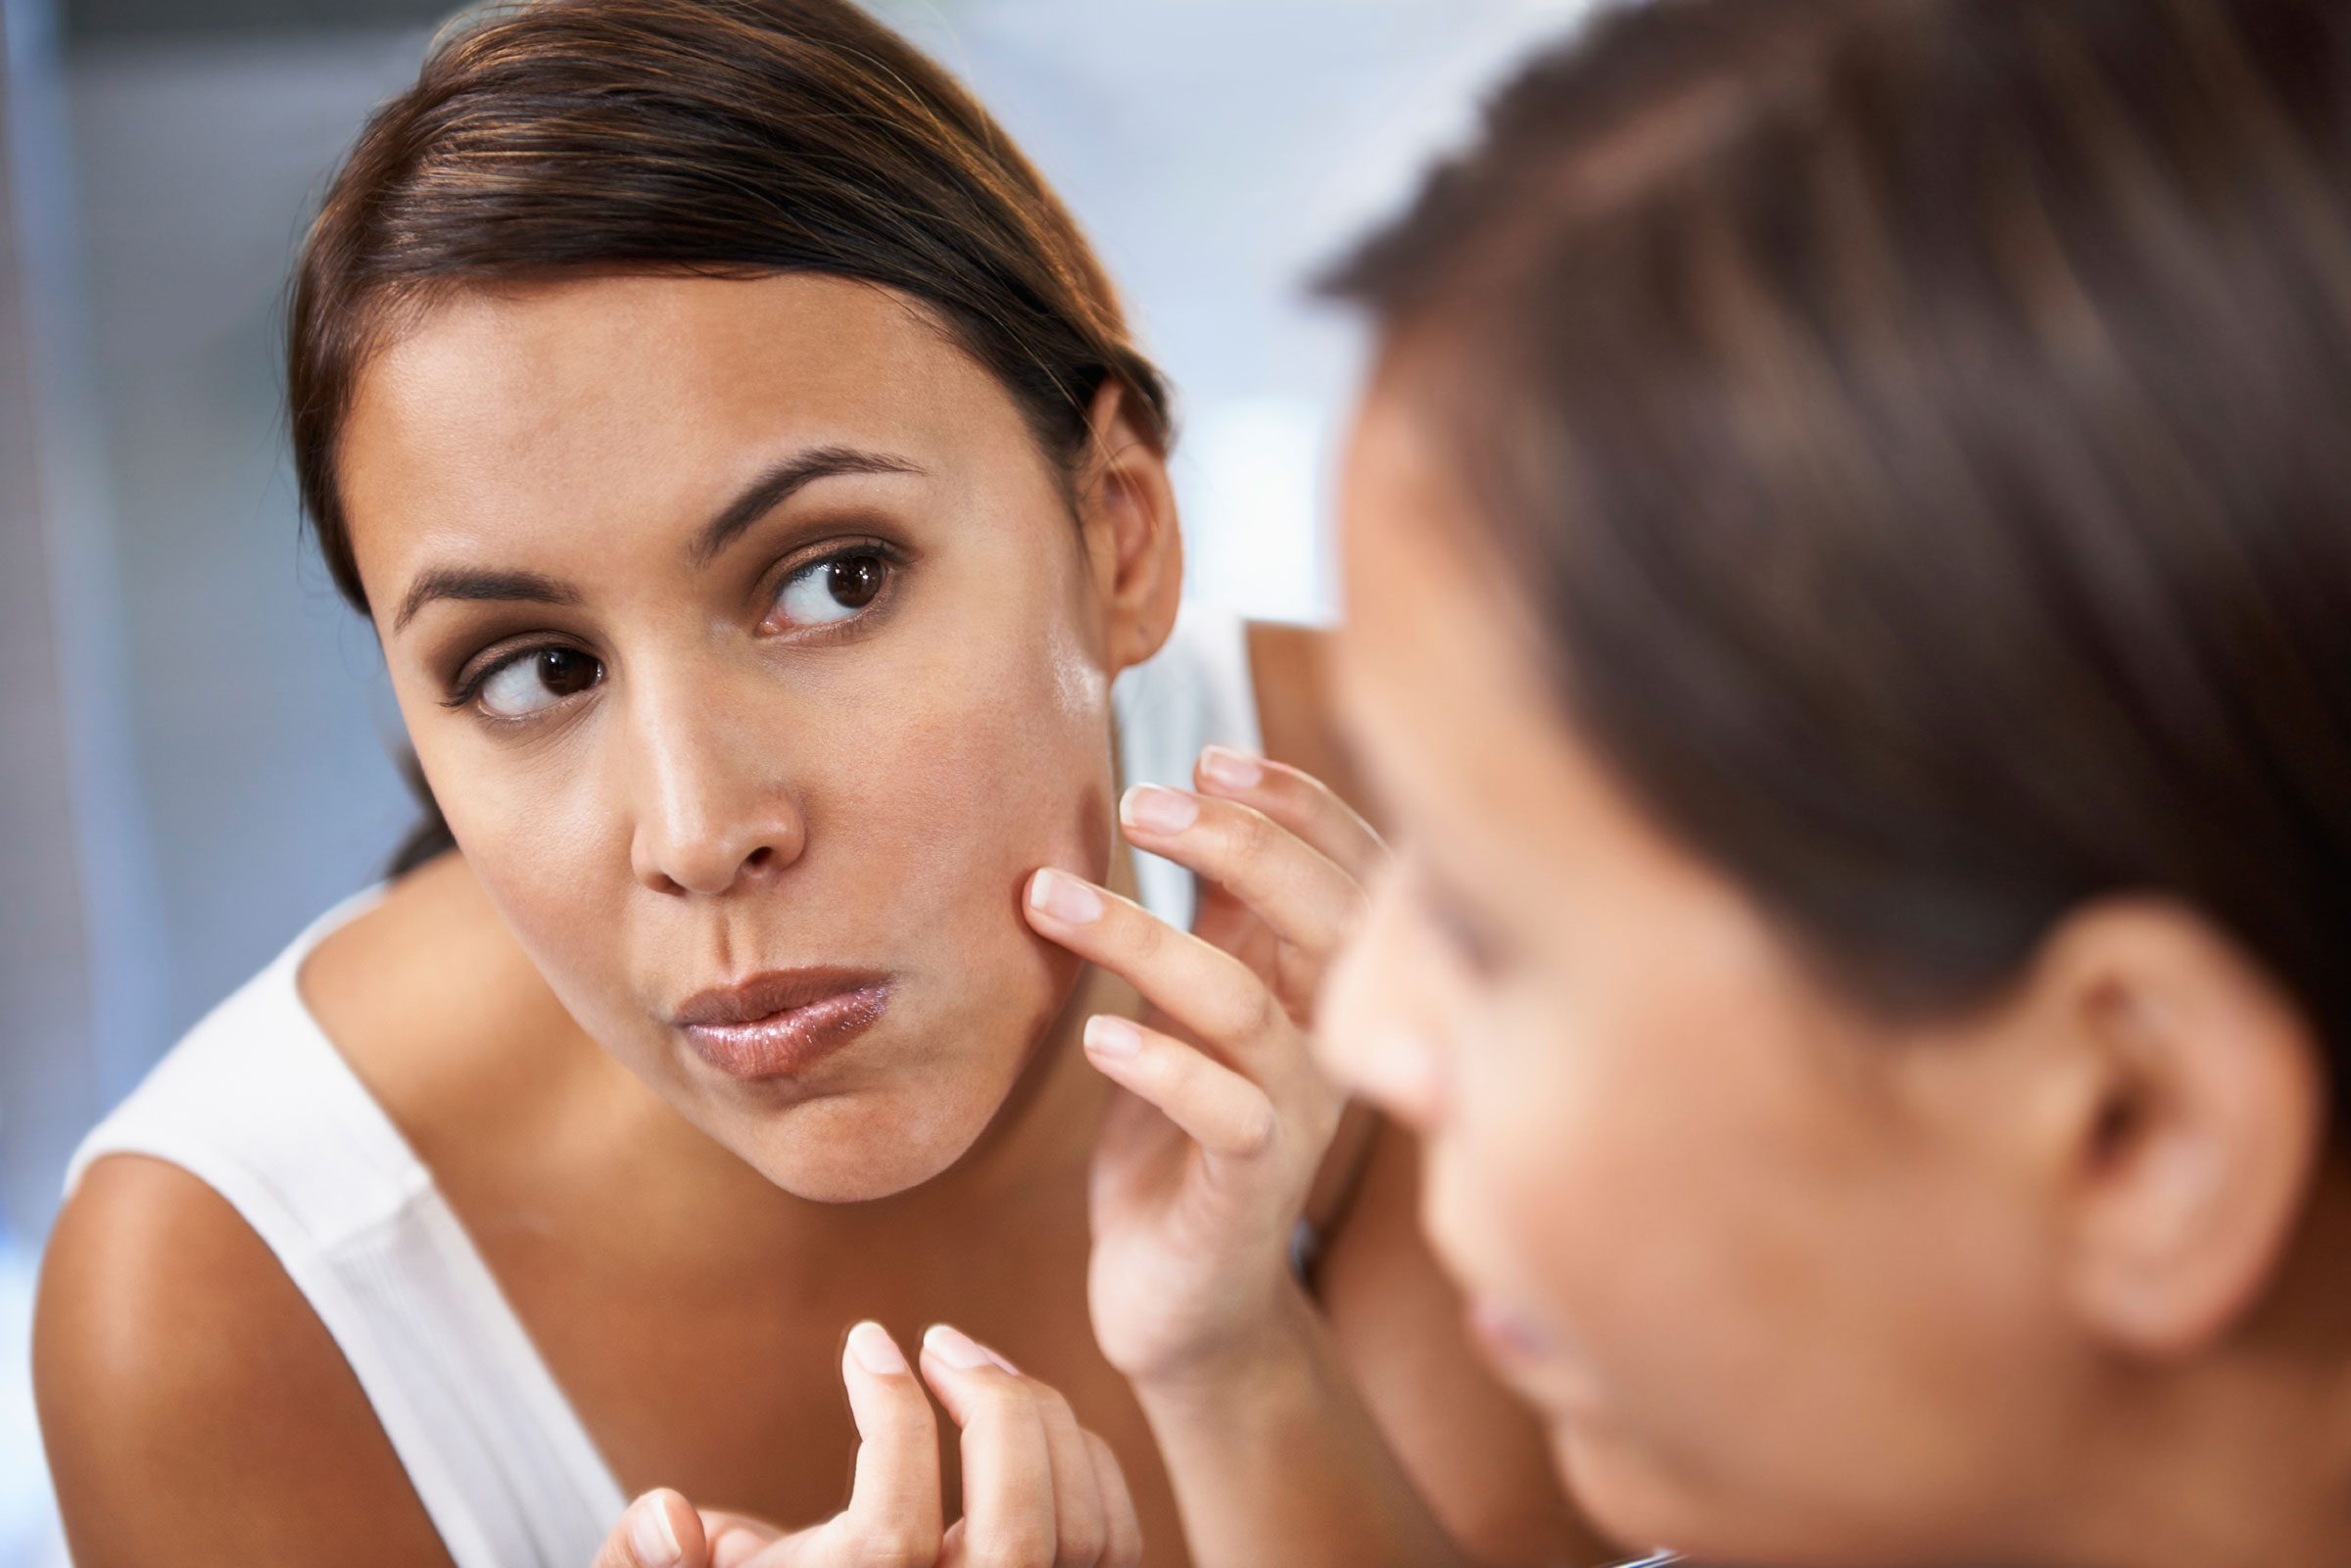 Dry or Dehydrated Skin: Which One Are You?